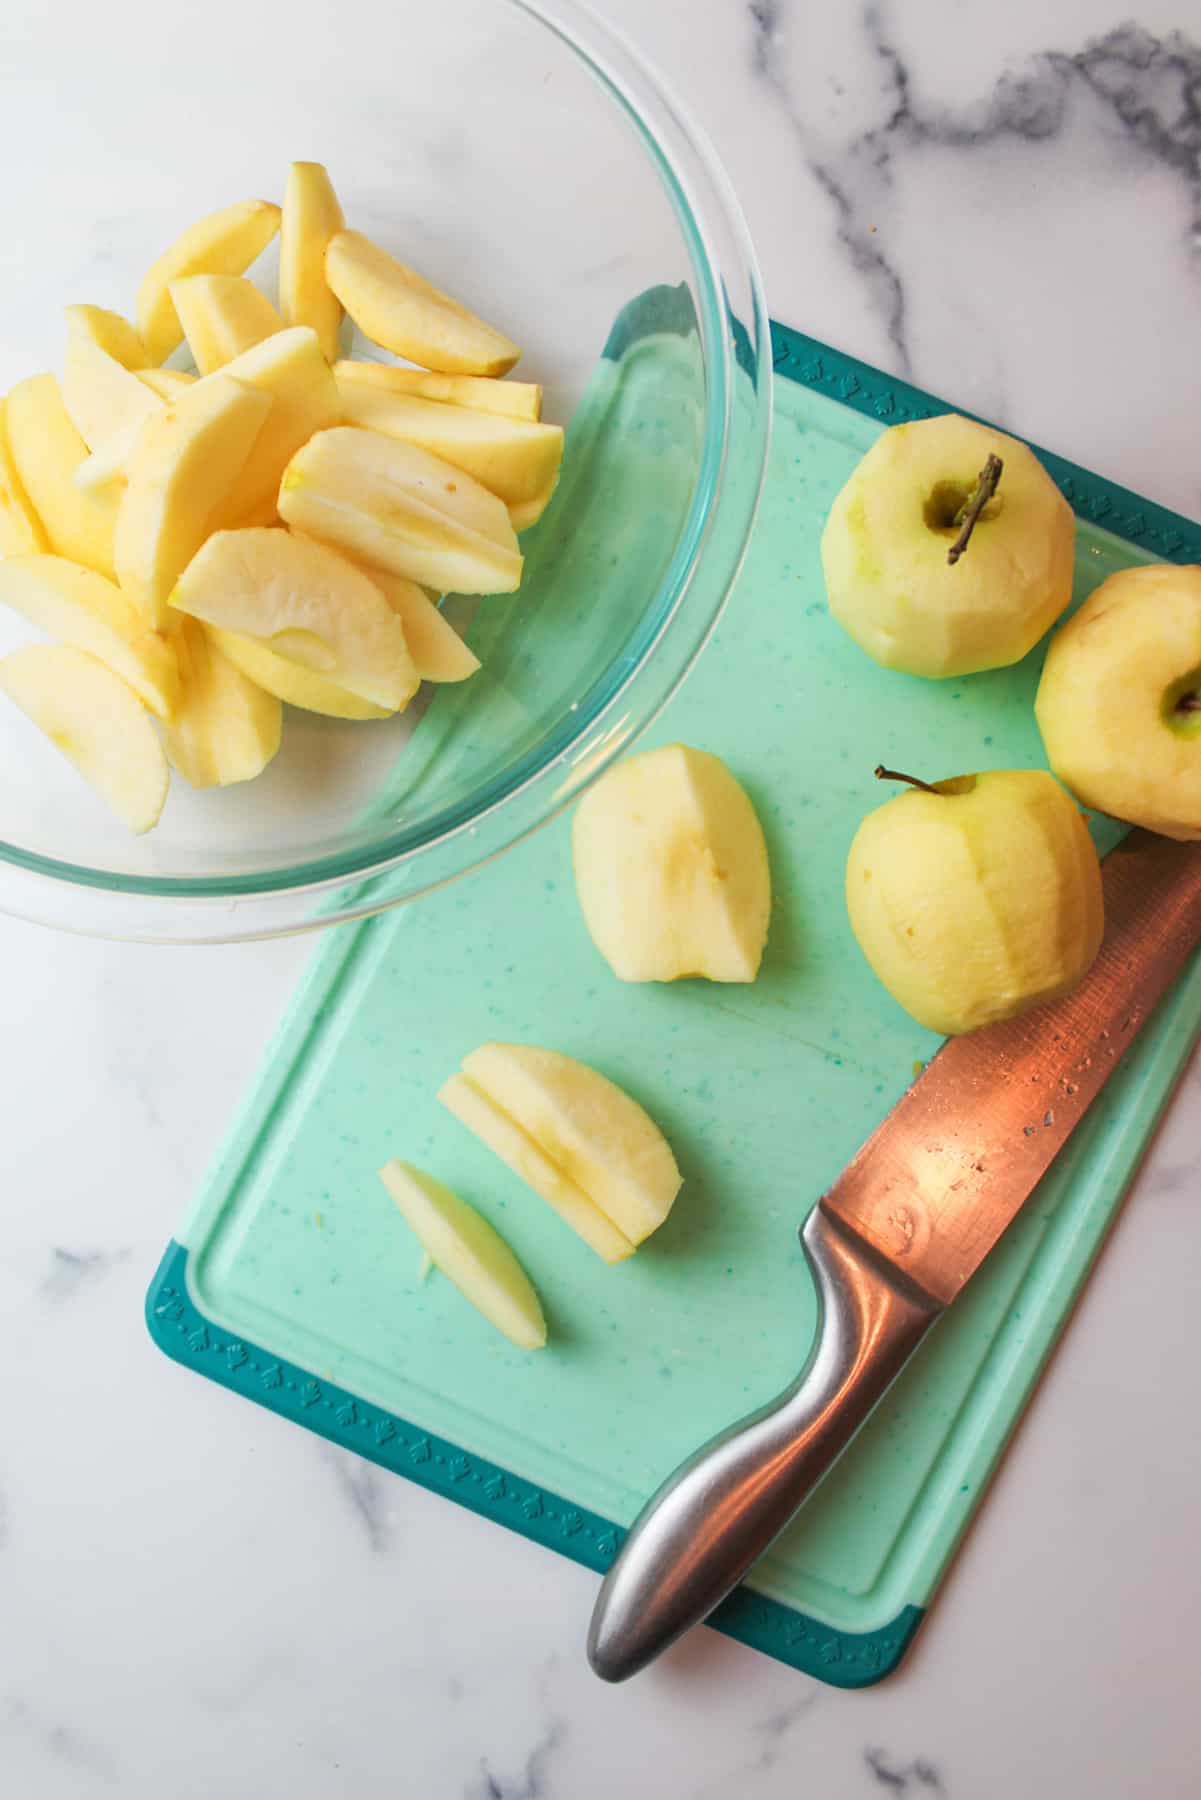 sliced apples on a cutting board with a knife and a bowl of apple slices